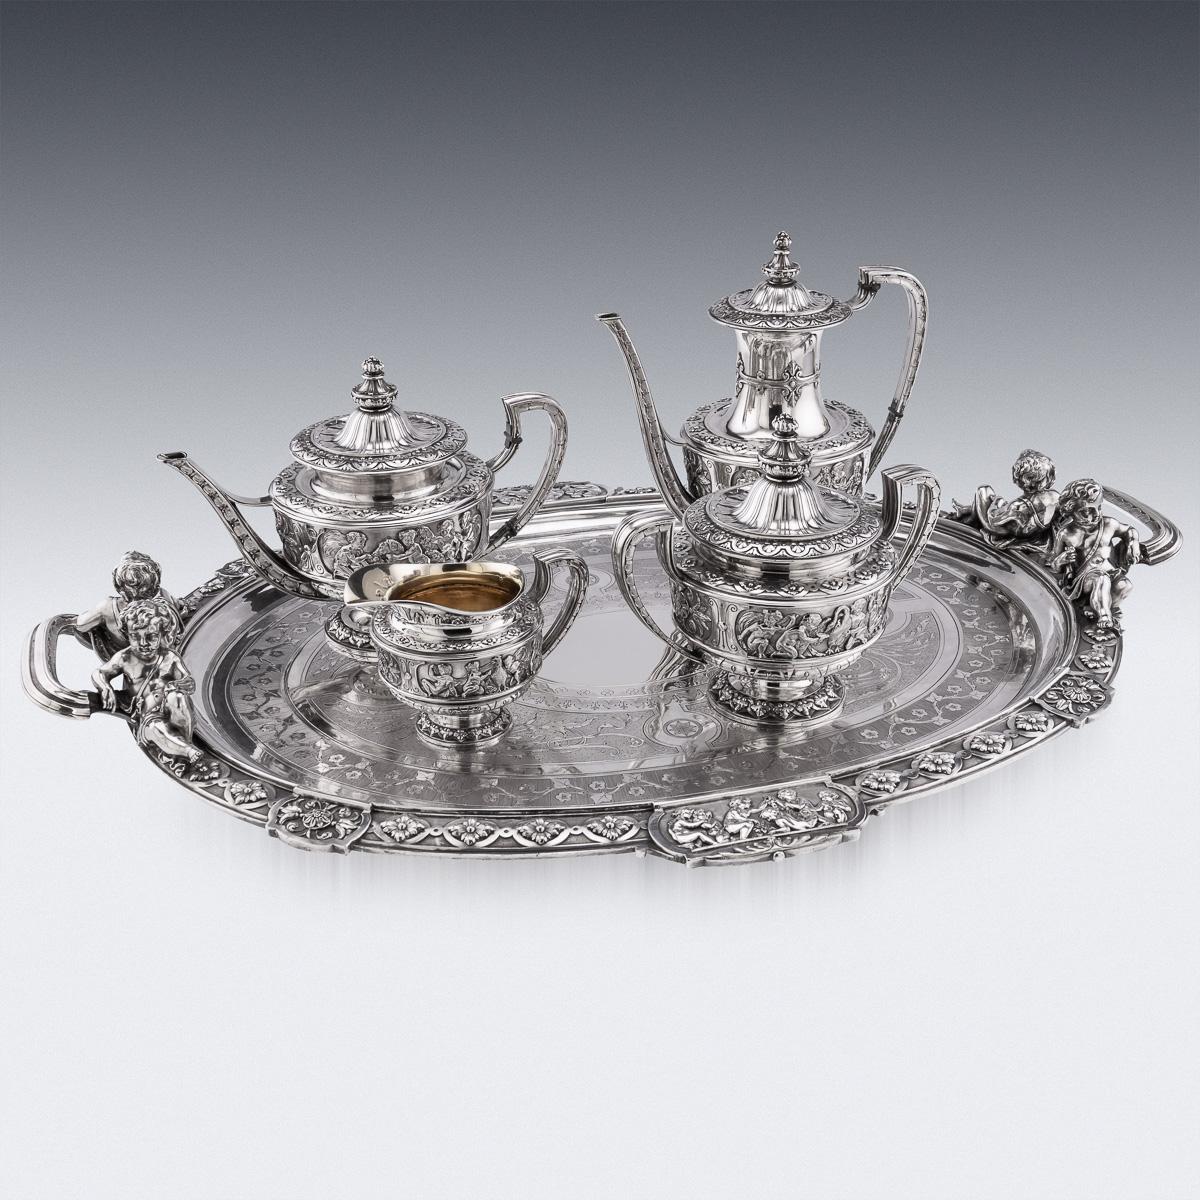 19th Century French silver tea & coffee service on tray, comprising of a coffee pot, teapot, sugar bowl, cream jug and large oval tray. Each piece with panel reserves, cast as putto in various pursuits, the tray handles capped with cast reclining